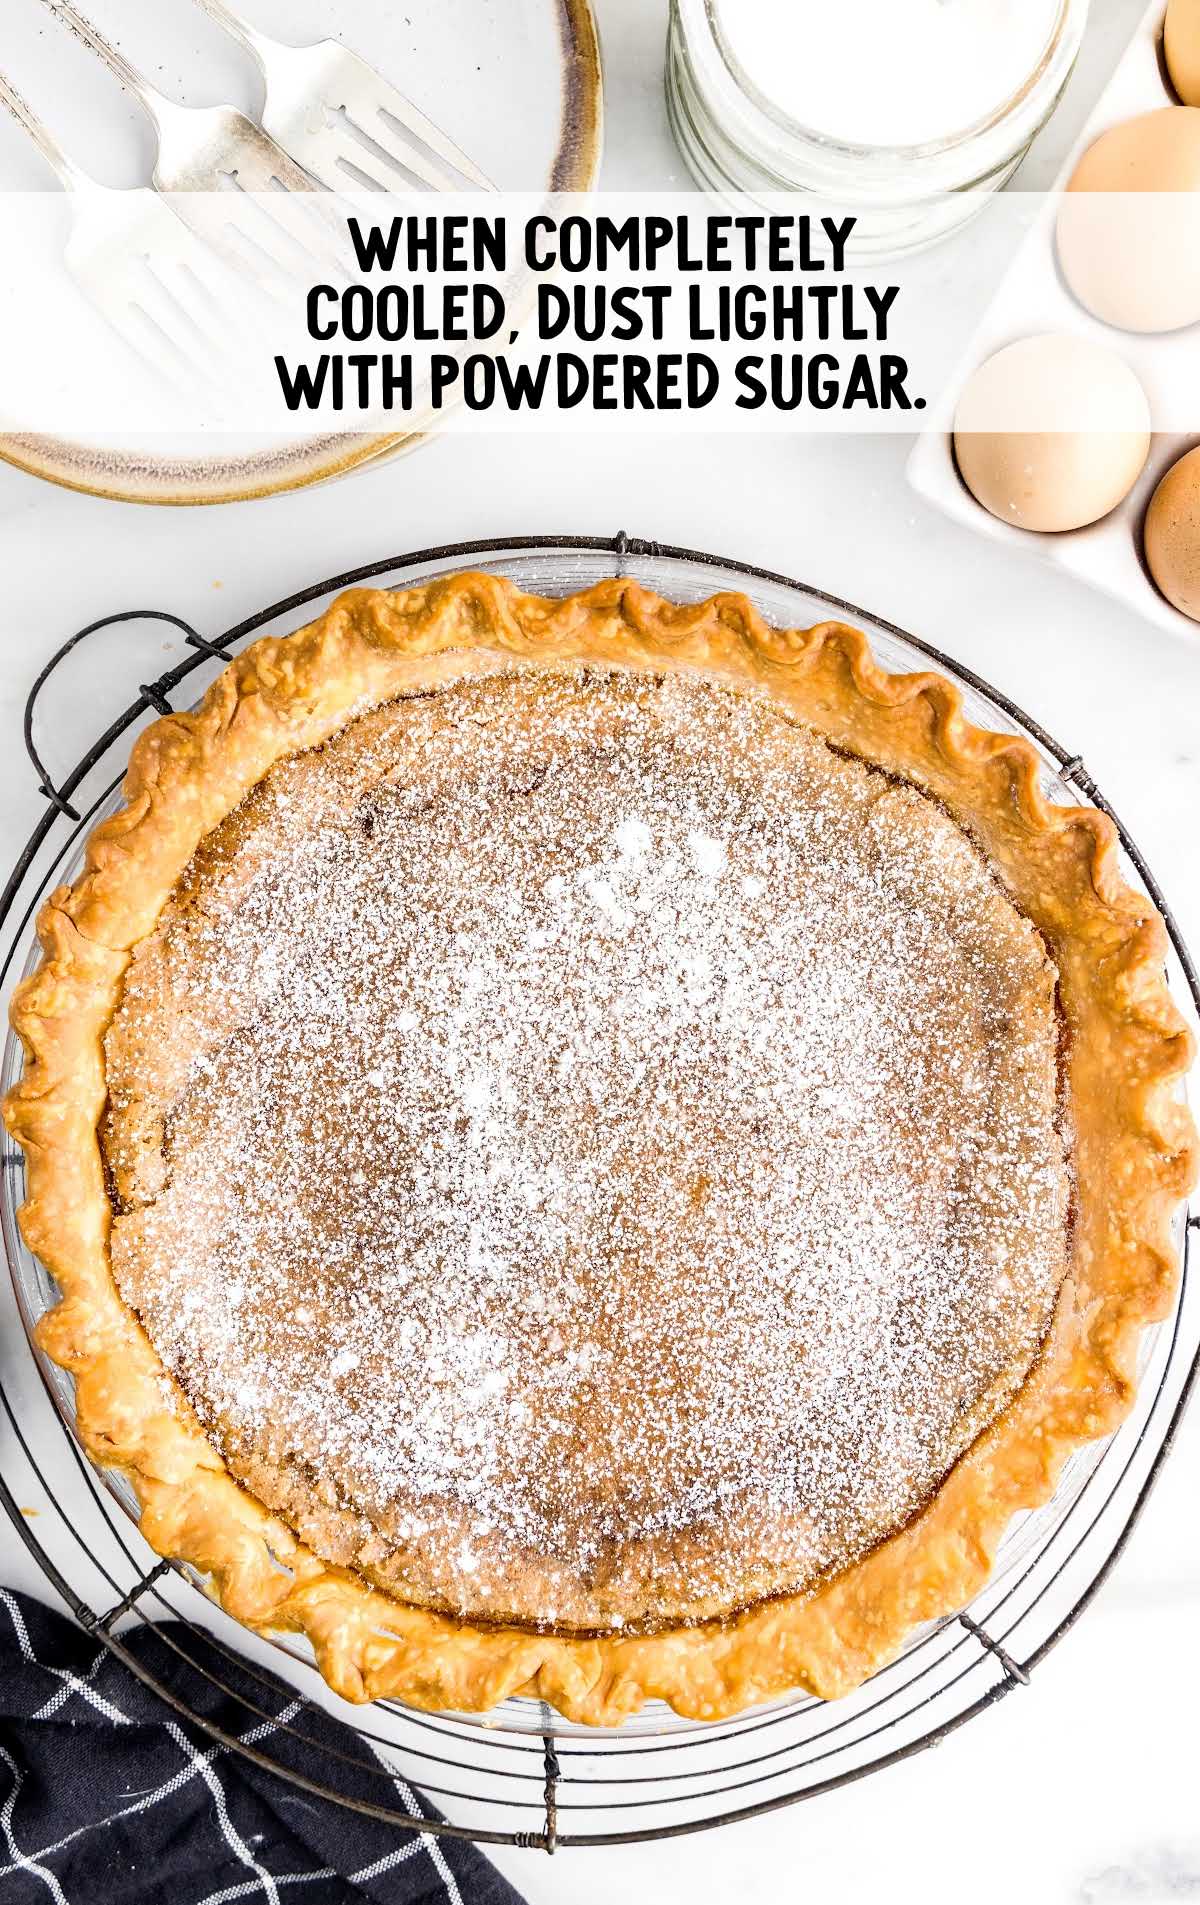 powdered sugar dusted on top of the pie